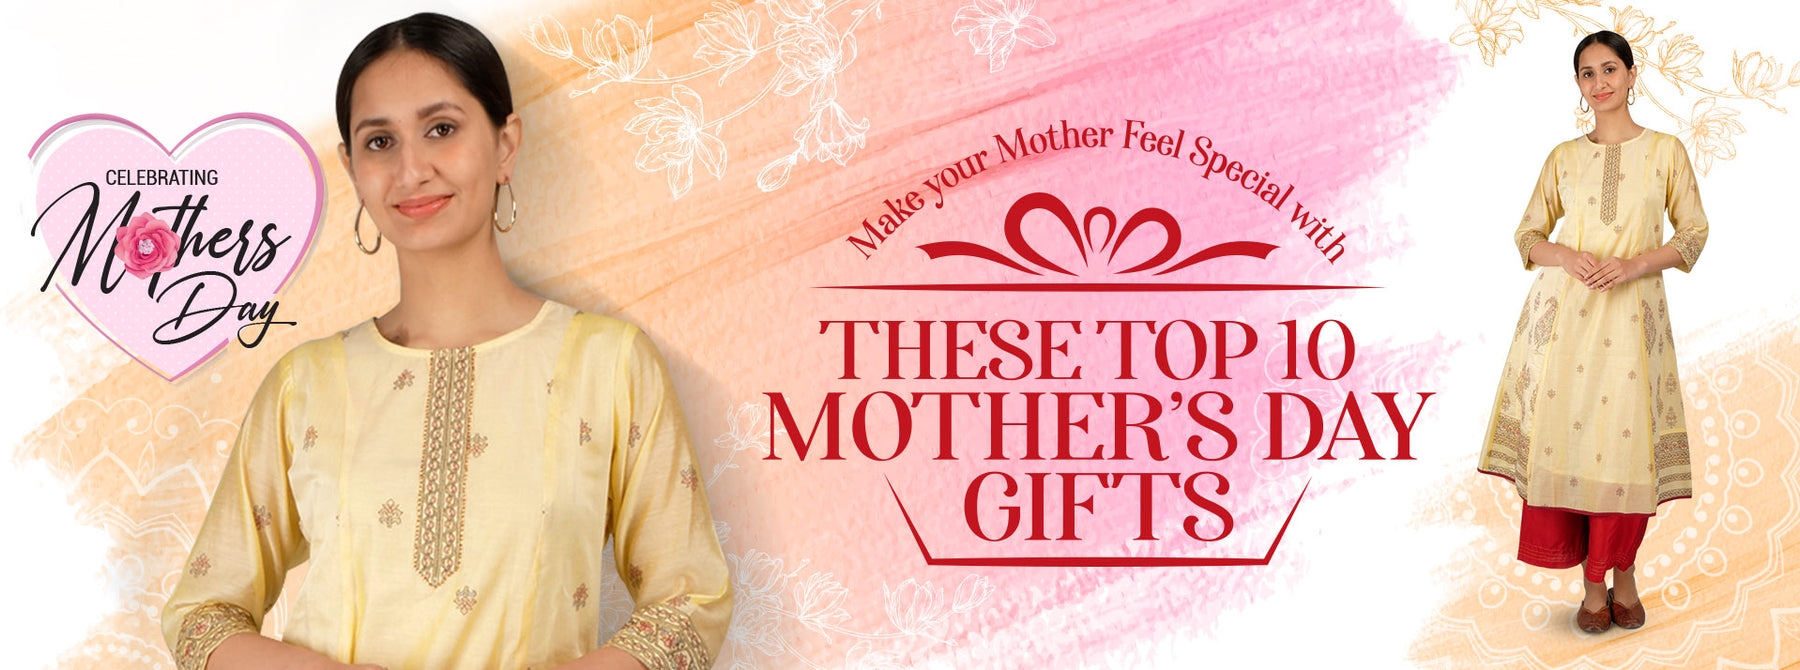 Make your Mother Feel Special with these Top 10 Mother’s Day Gifts